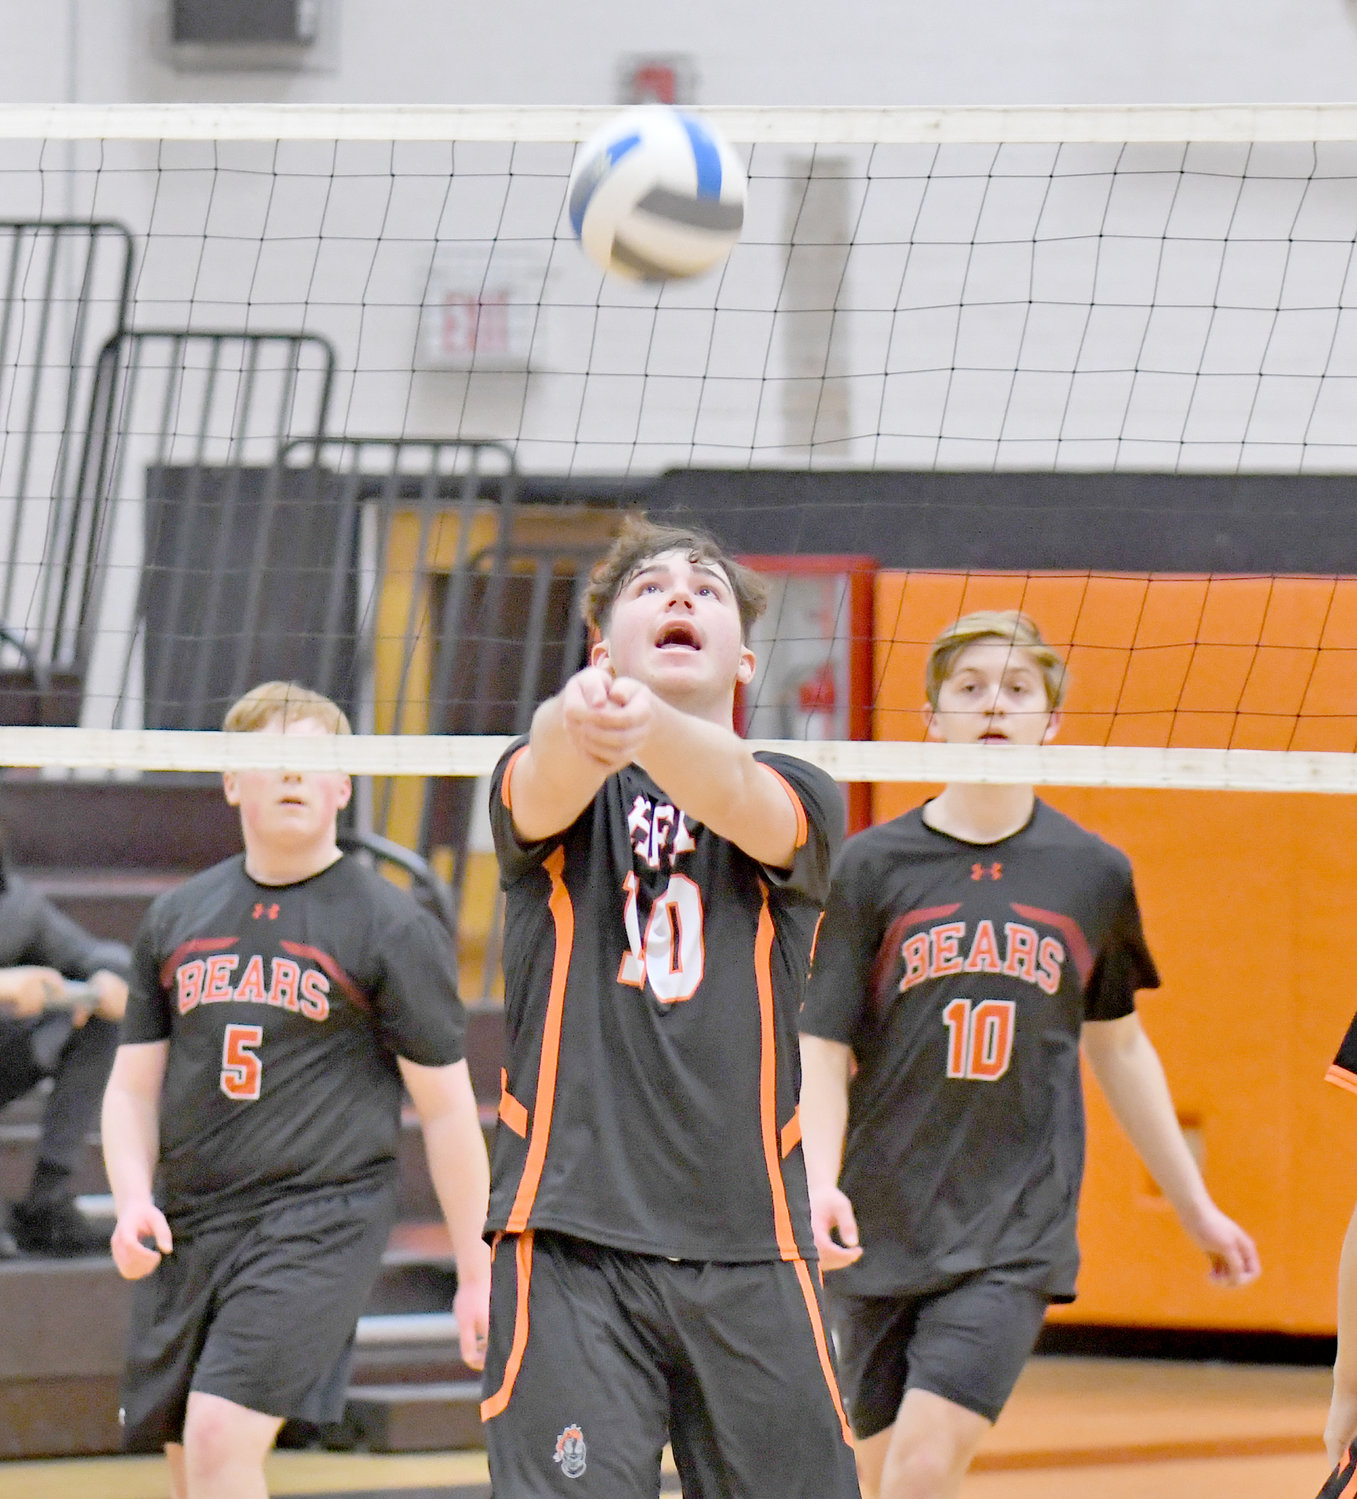 Rome Free Academy’s Casey Podkowka looks to set up a shot against Chittenango in Rome on Thursday. Chittenanago’s Roger Mulholland, left, and Cole Thomas are in the background. Chittenango won in three sets.